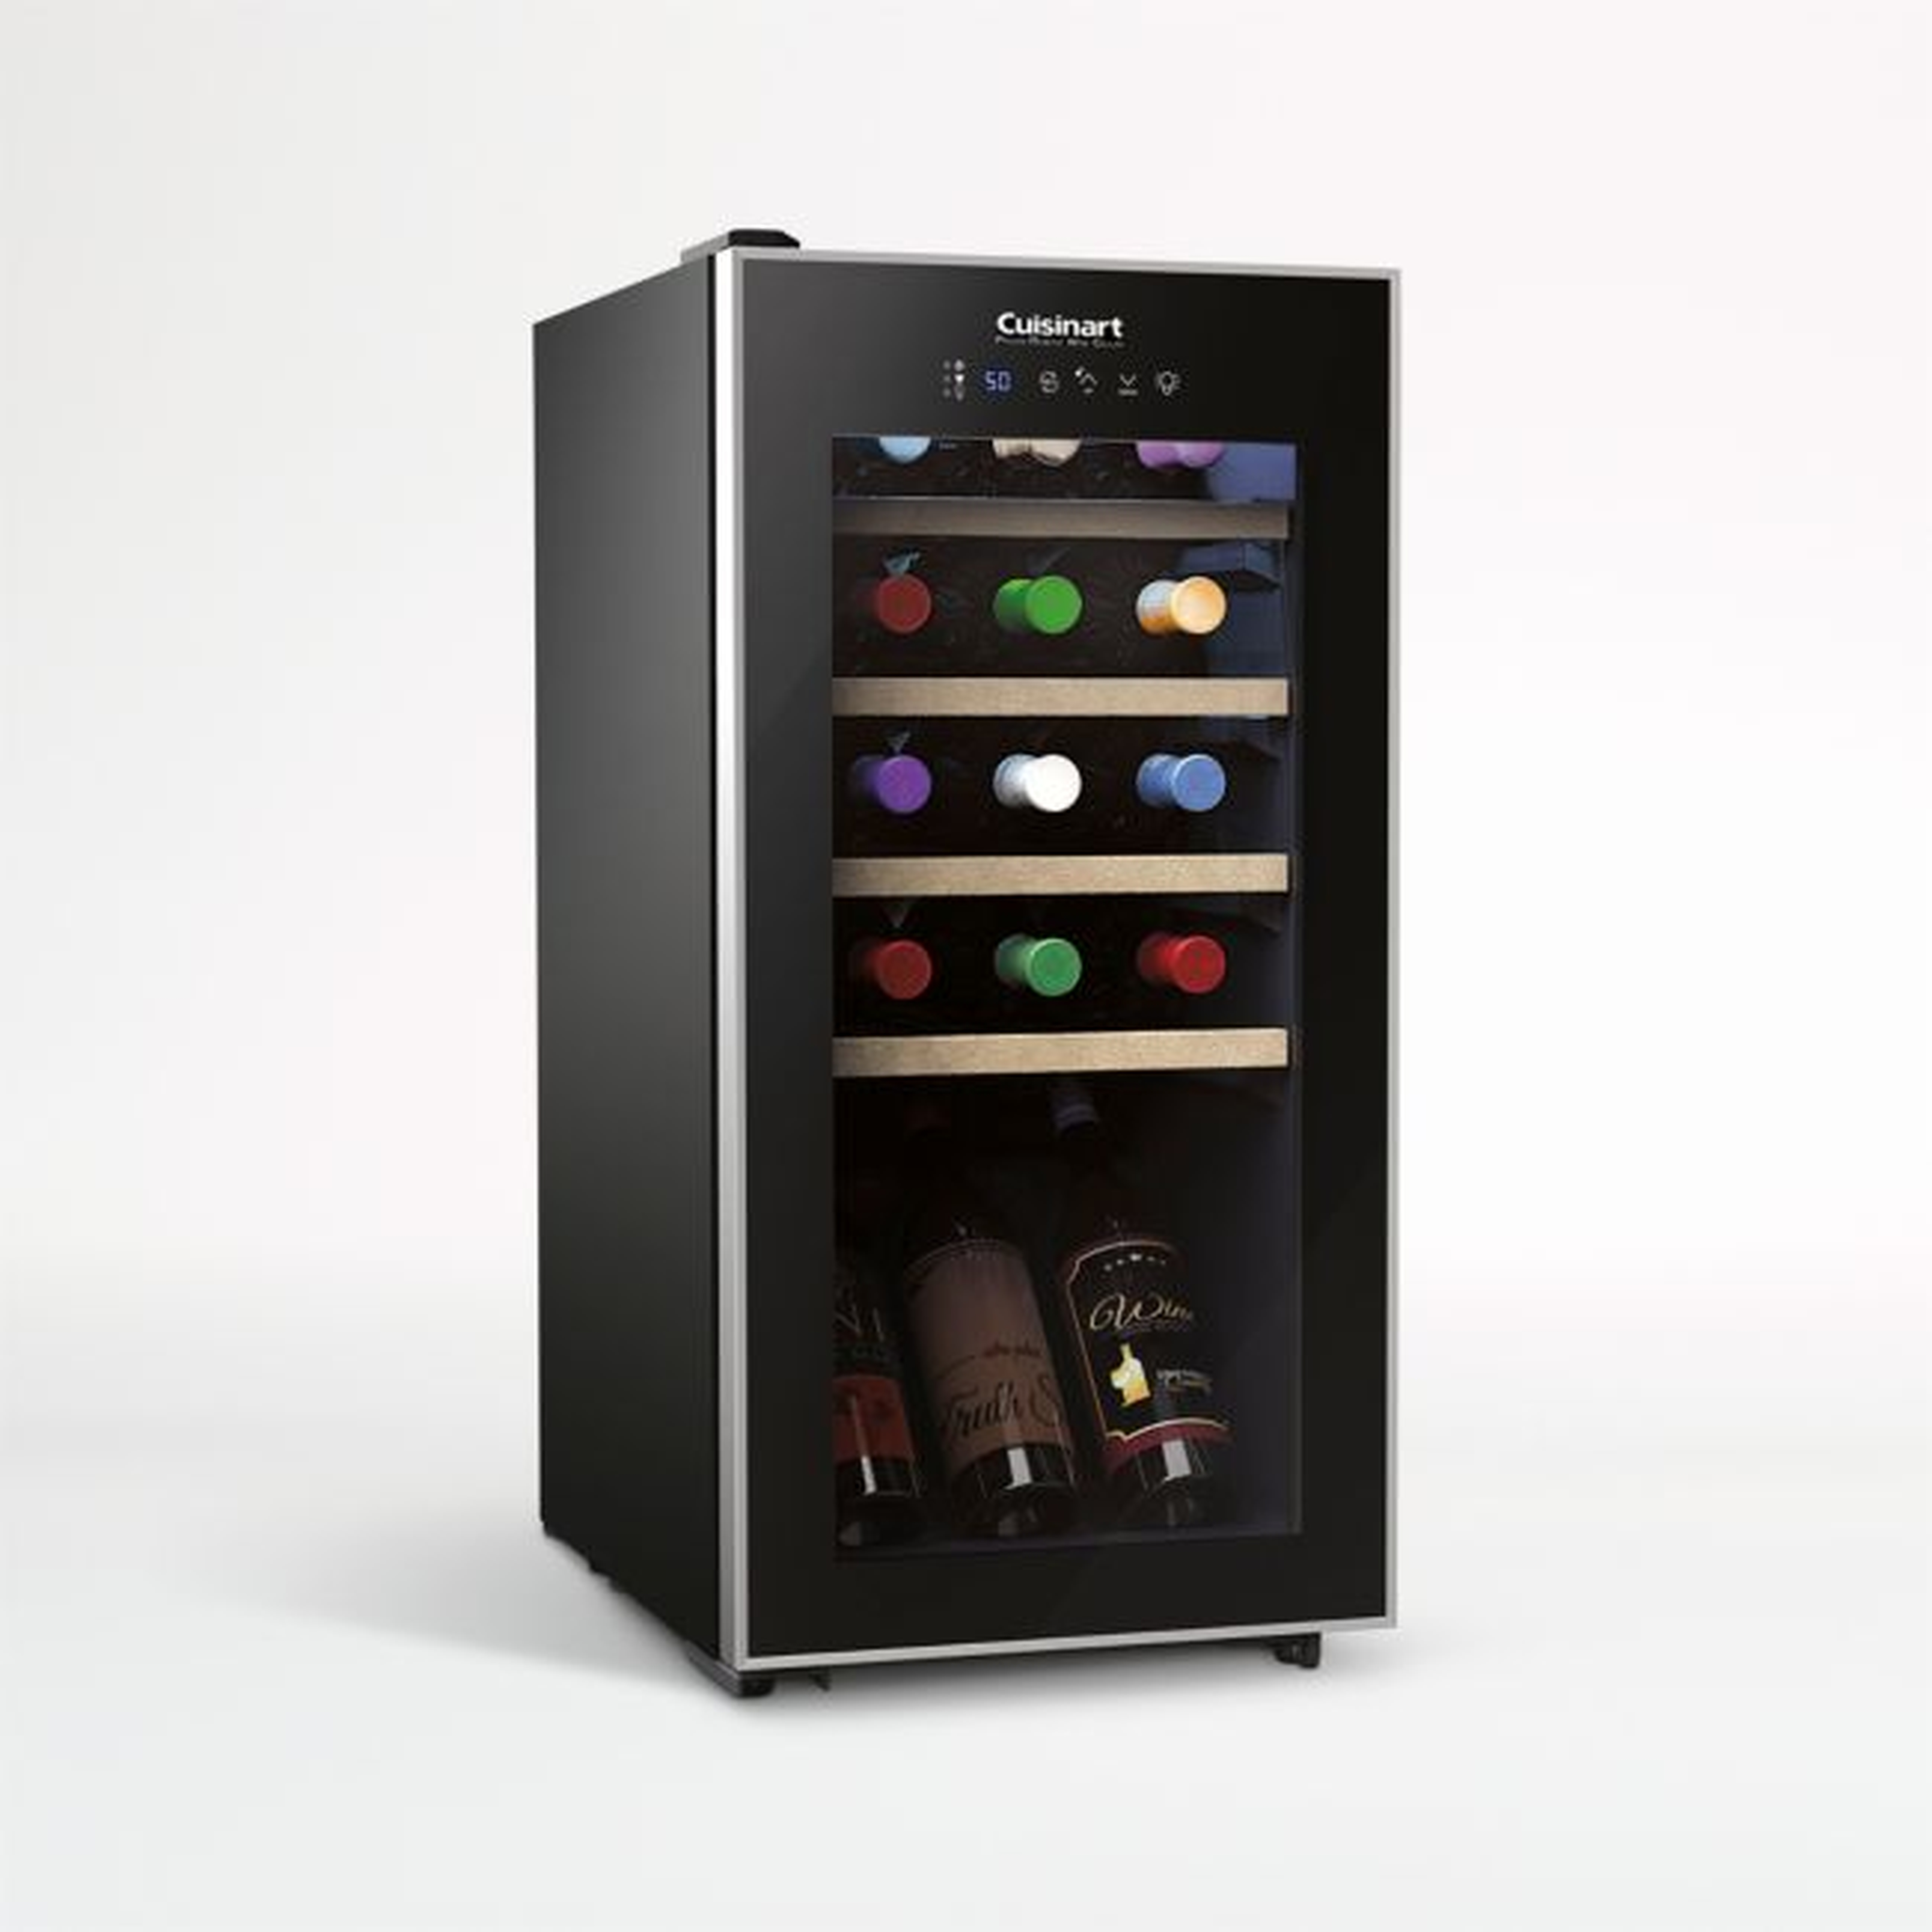 Cuisinart ® Private Reserve ® 15-Bottle Wine Cooler Fridge with Compressor - Crate and Barrel